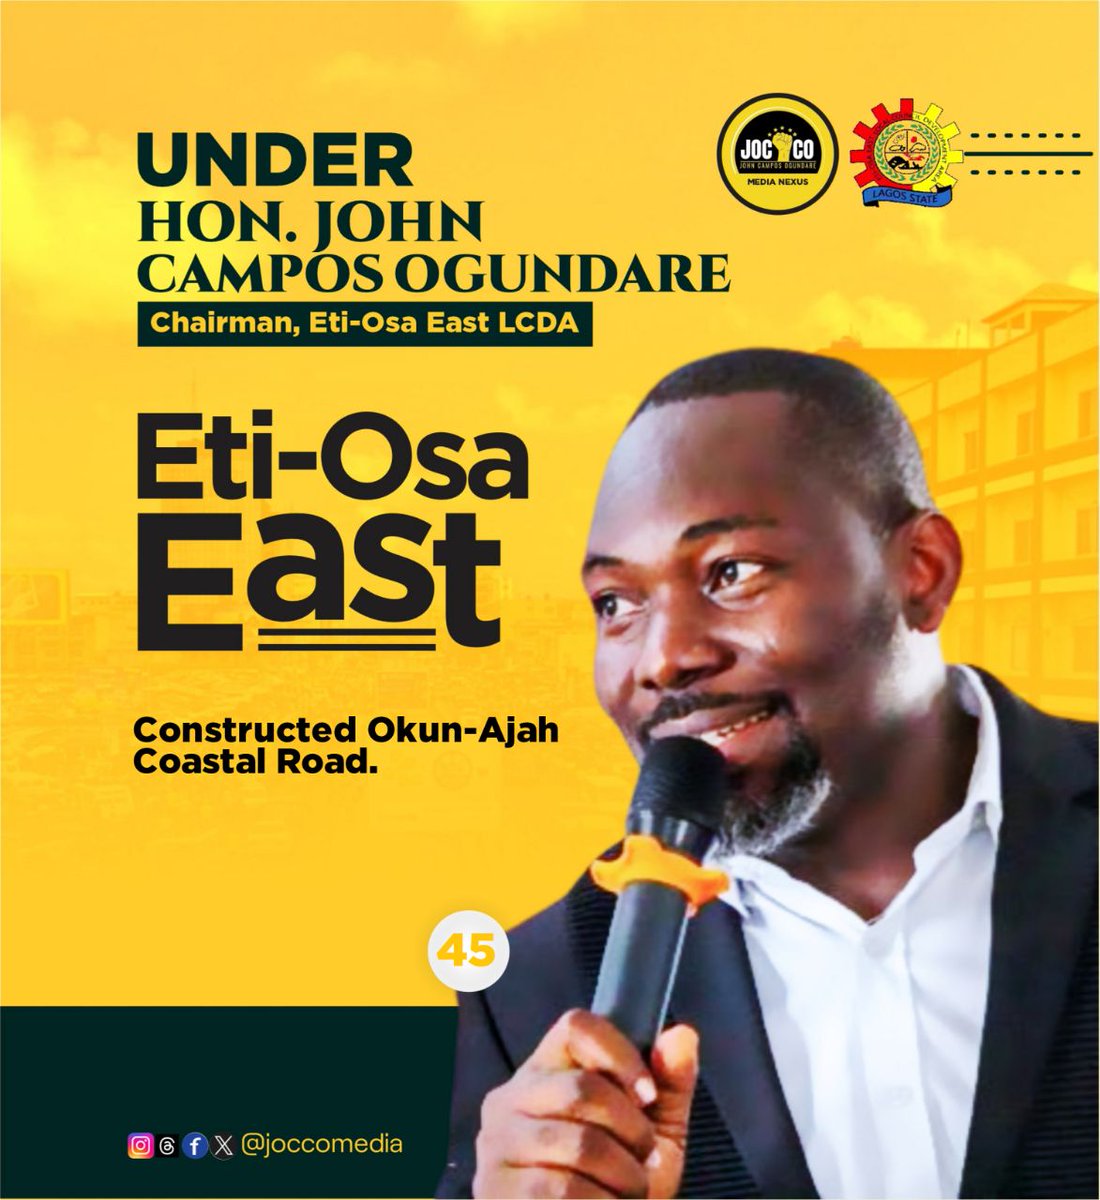 Episode 26 Attached is a flyer of what Eti-Osa East has done under the leadership of Hon. John Ogundare Campos. Watch out for more! #roadconstruction/rehabilitation #evidencedey #JoccoIsWorking #expectmore Jocco Media Nexus